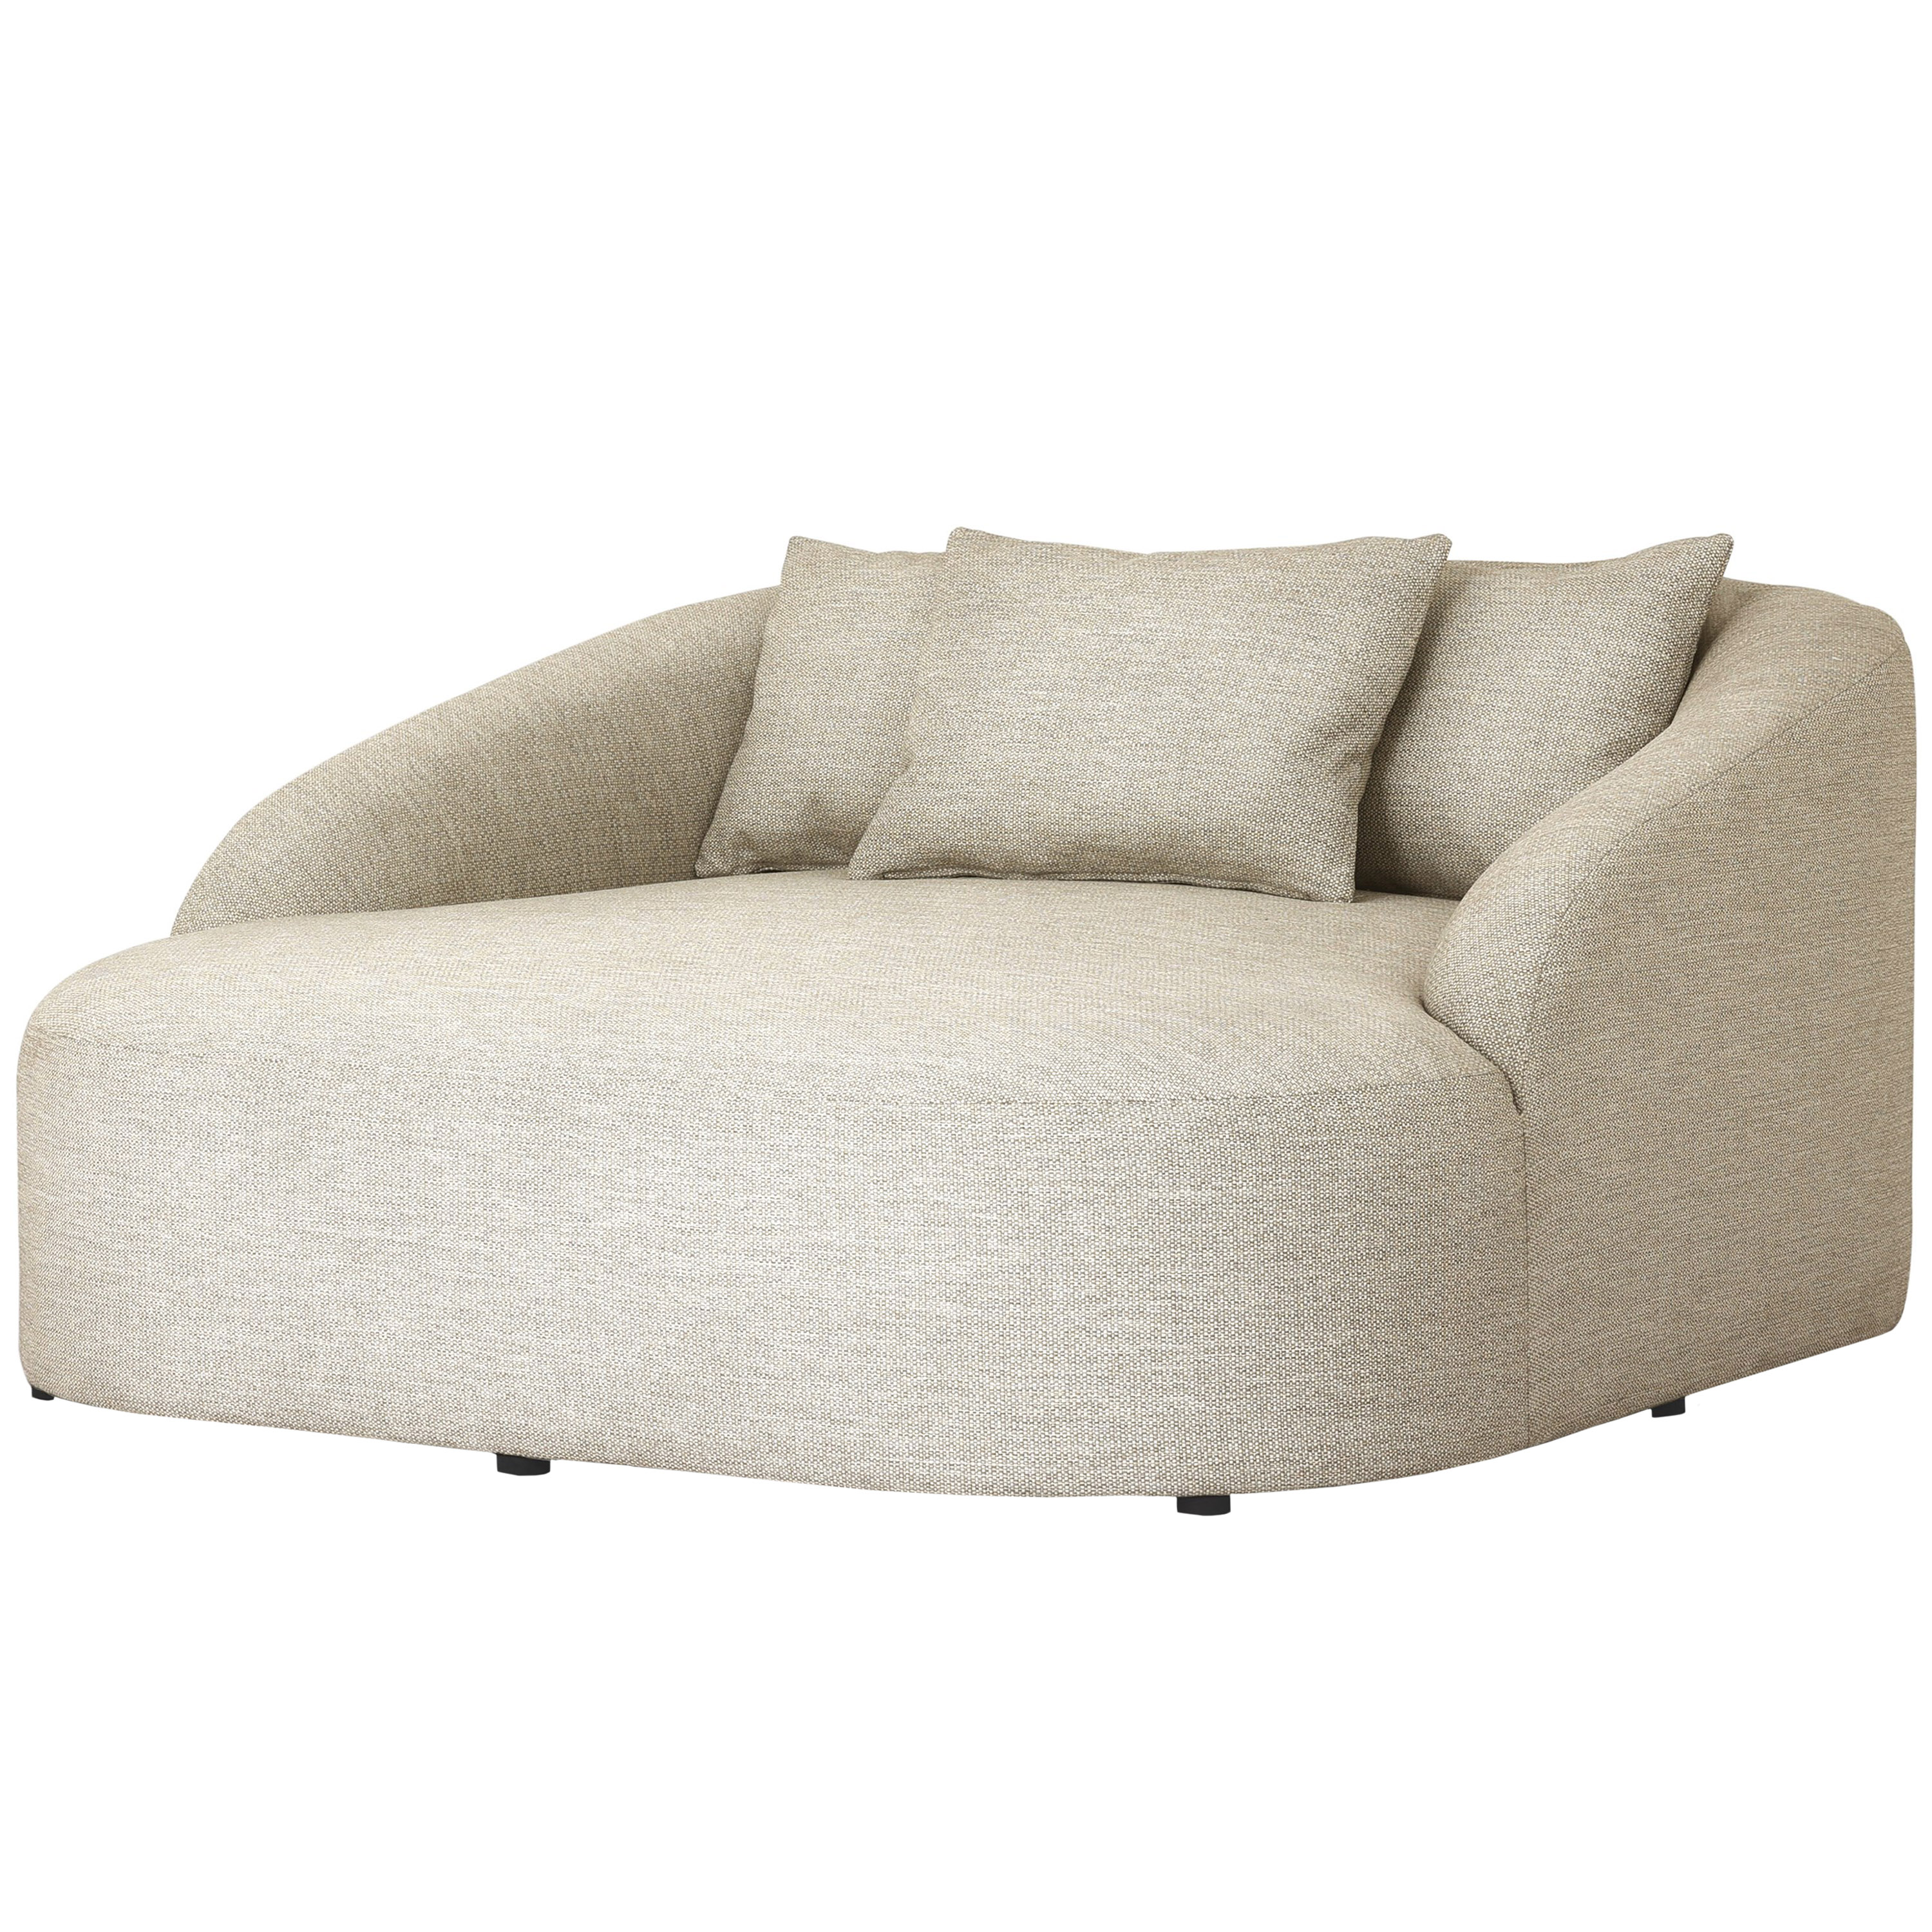 Toby Outdoor Daybed, Sand